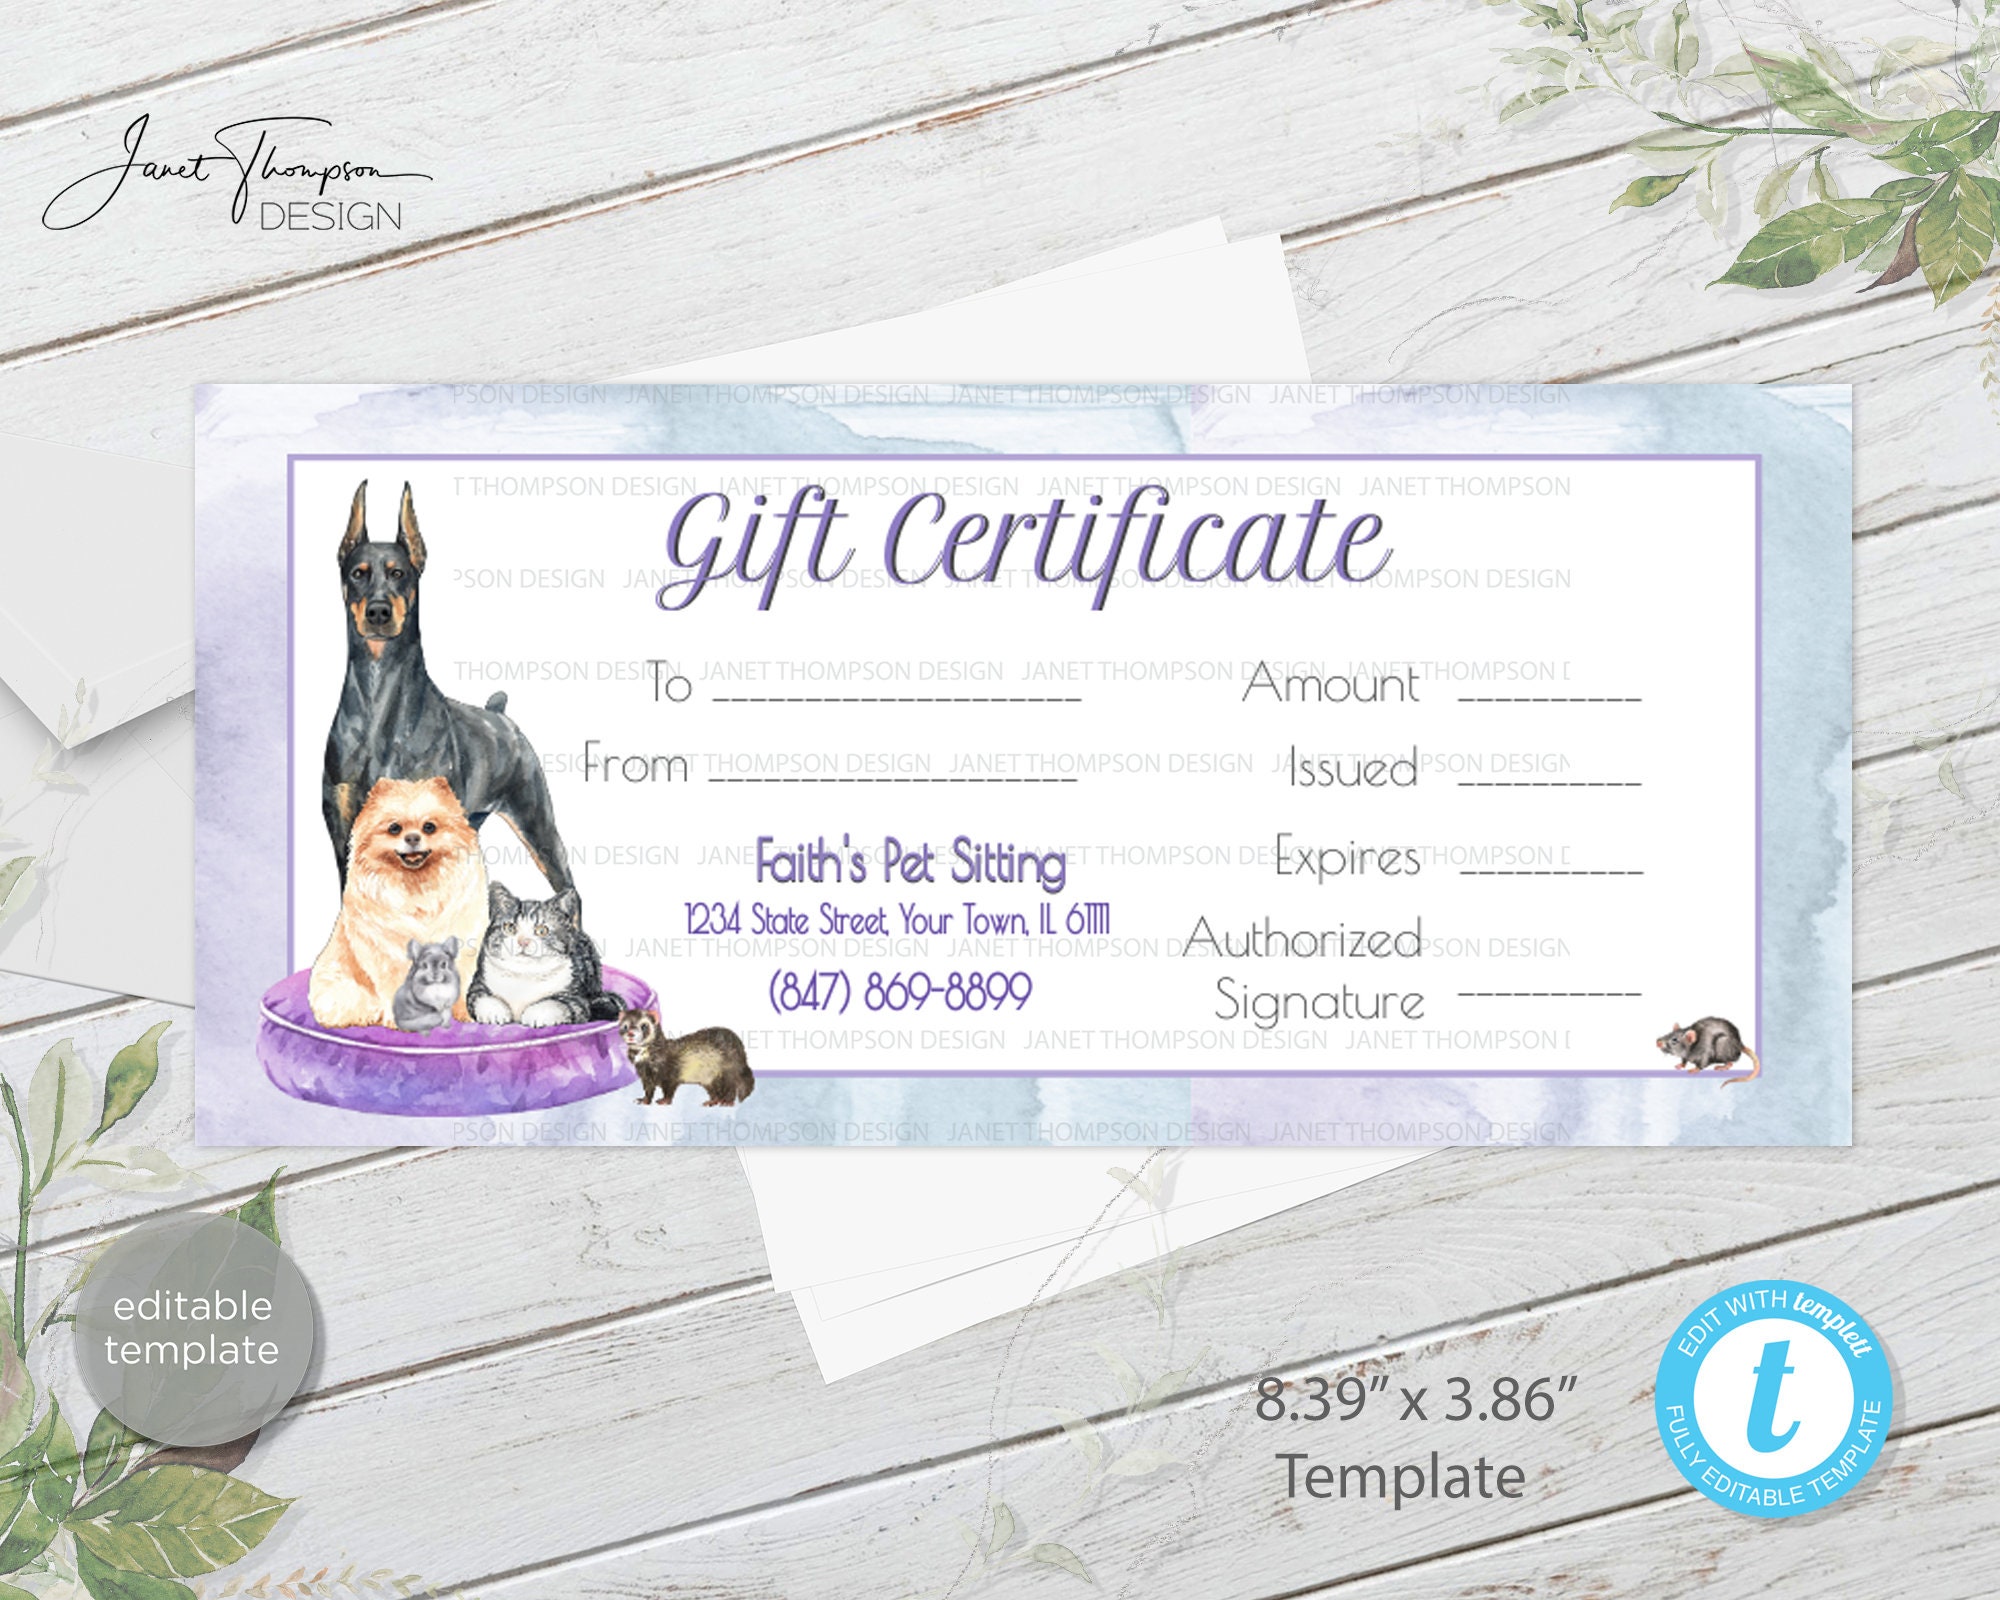 Gift Certificate Template Retail Coupon Pet Sitting Dog | Etsy